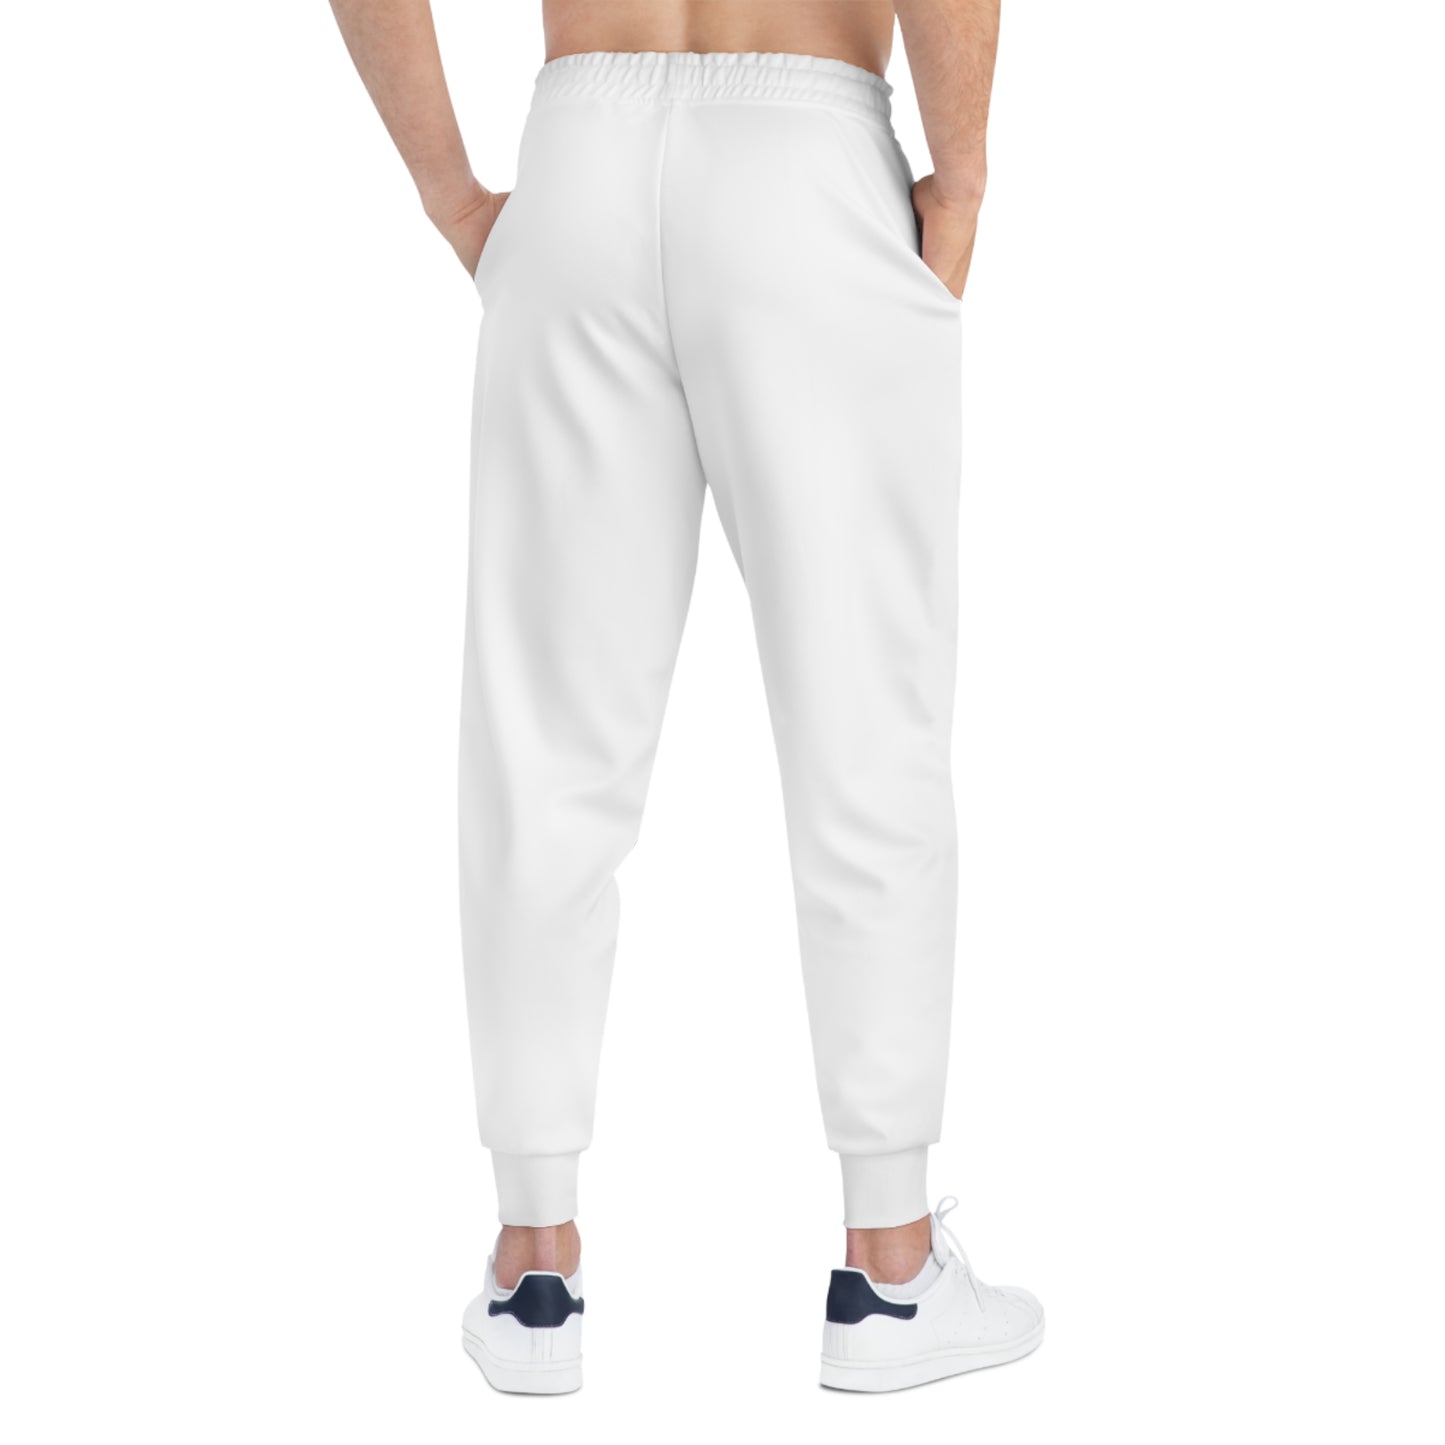 On Fire Music Joggers